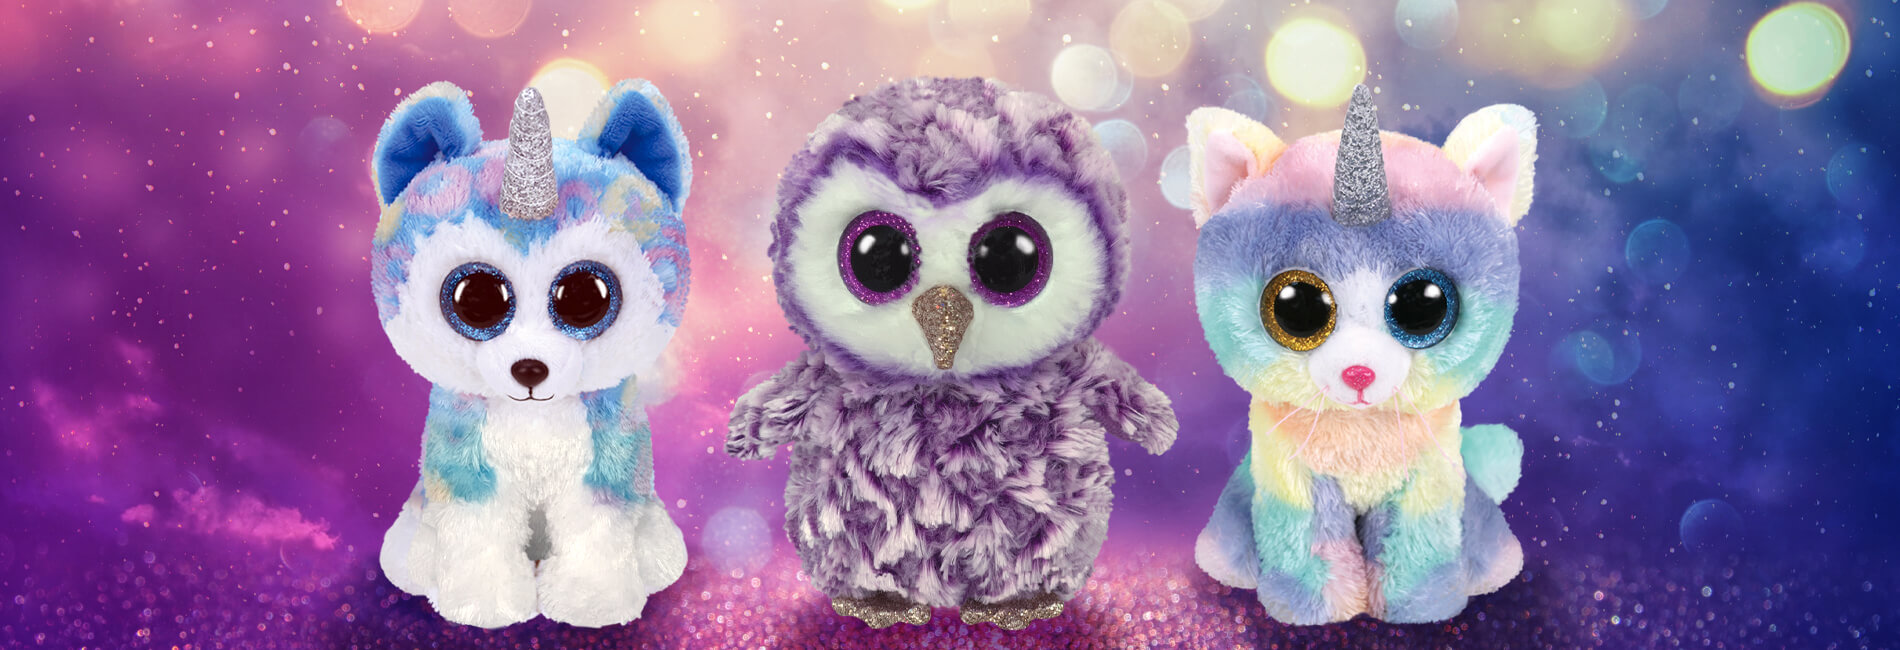 extract erfgoed Autonomie Ty Beanie Boos Plush Stuffed Animals :: Official Ty Store